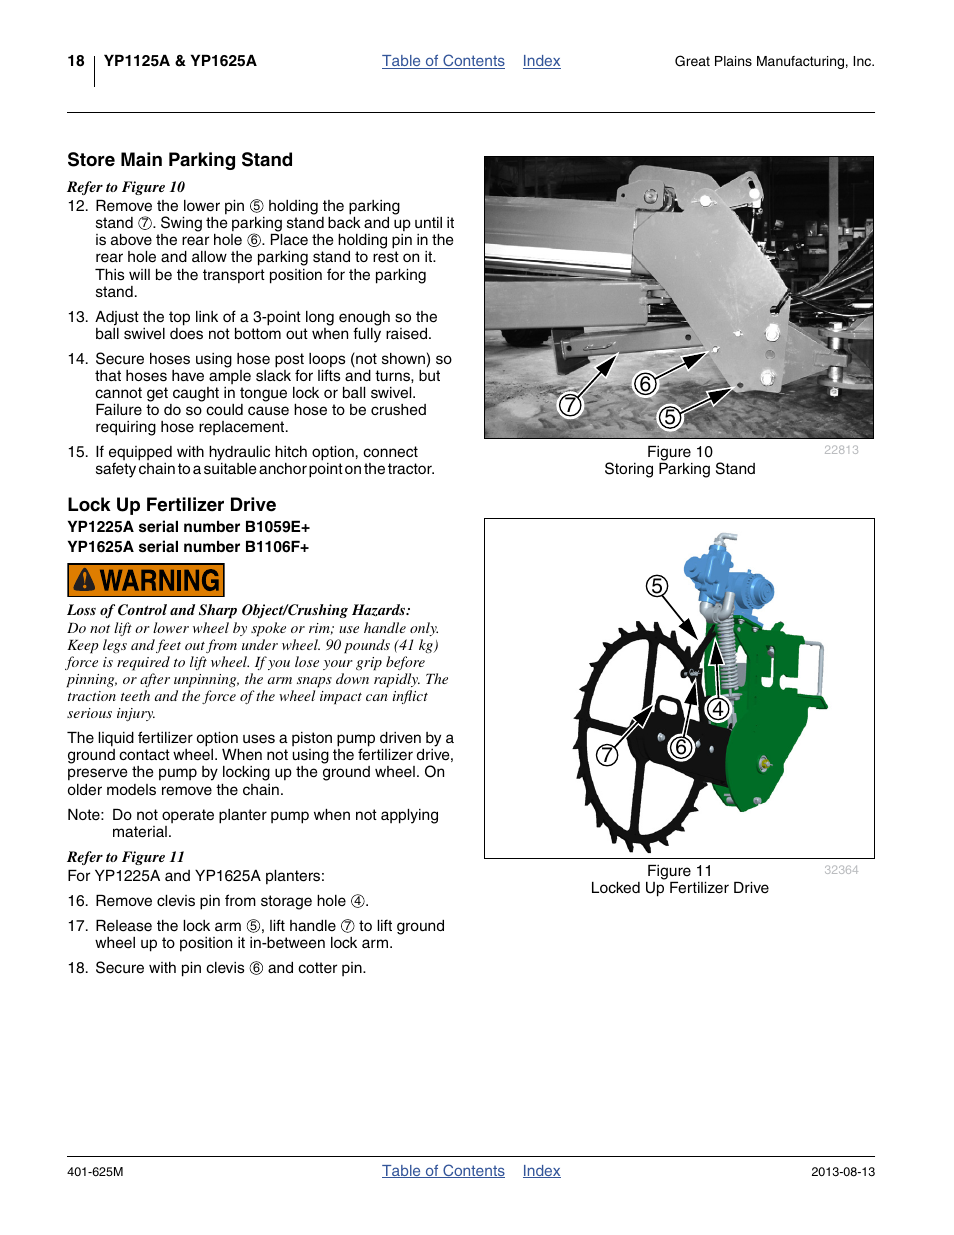 Store main parking stand, Lock up fertilizer drive, Yp1225a serial number b1059e | Yp1625a serial number b1106f, Store main parking stand lock up fertilizer drive | Great Plains YP1625A Operator Manual User Manual | Page 22 / 172